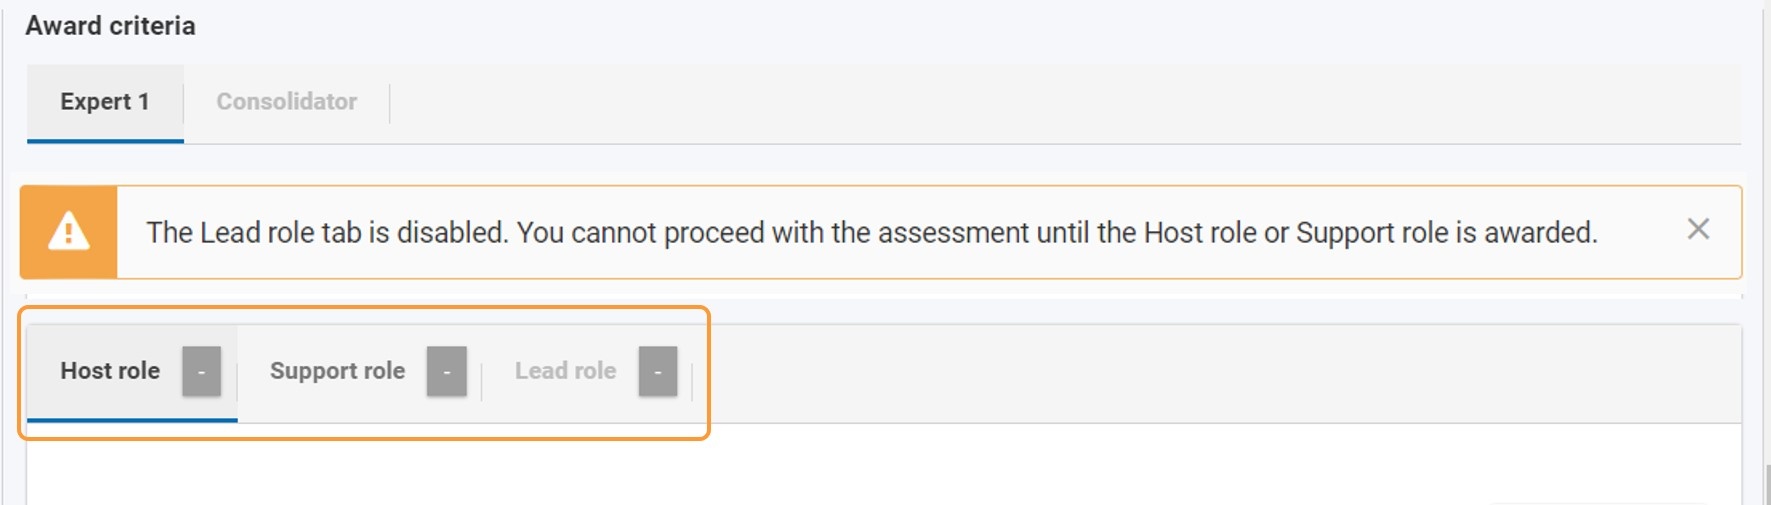 Example of Award Criteria tabs in assessment for Host, Support and Lead organisation, including closable warning message